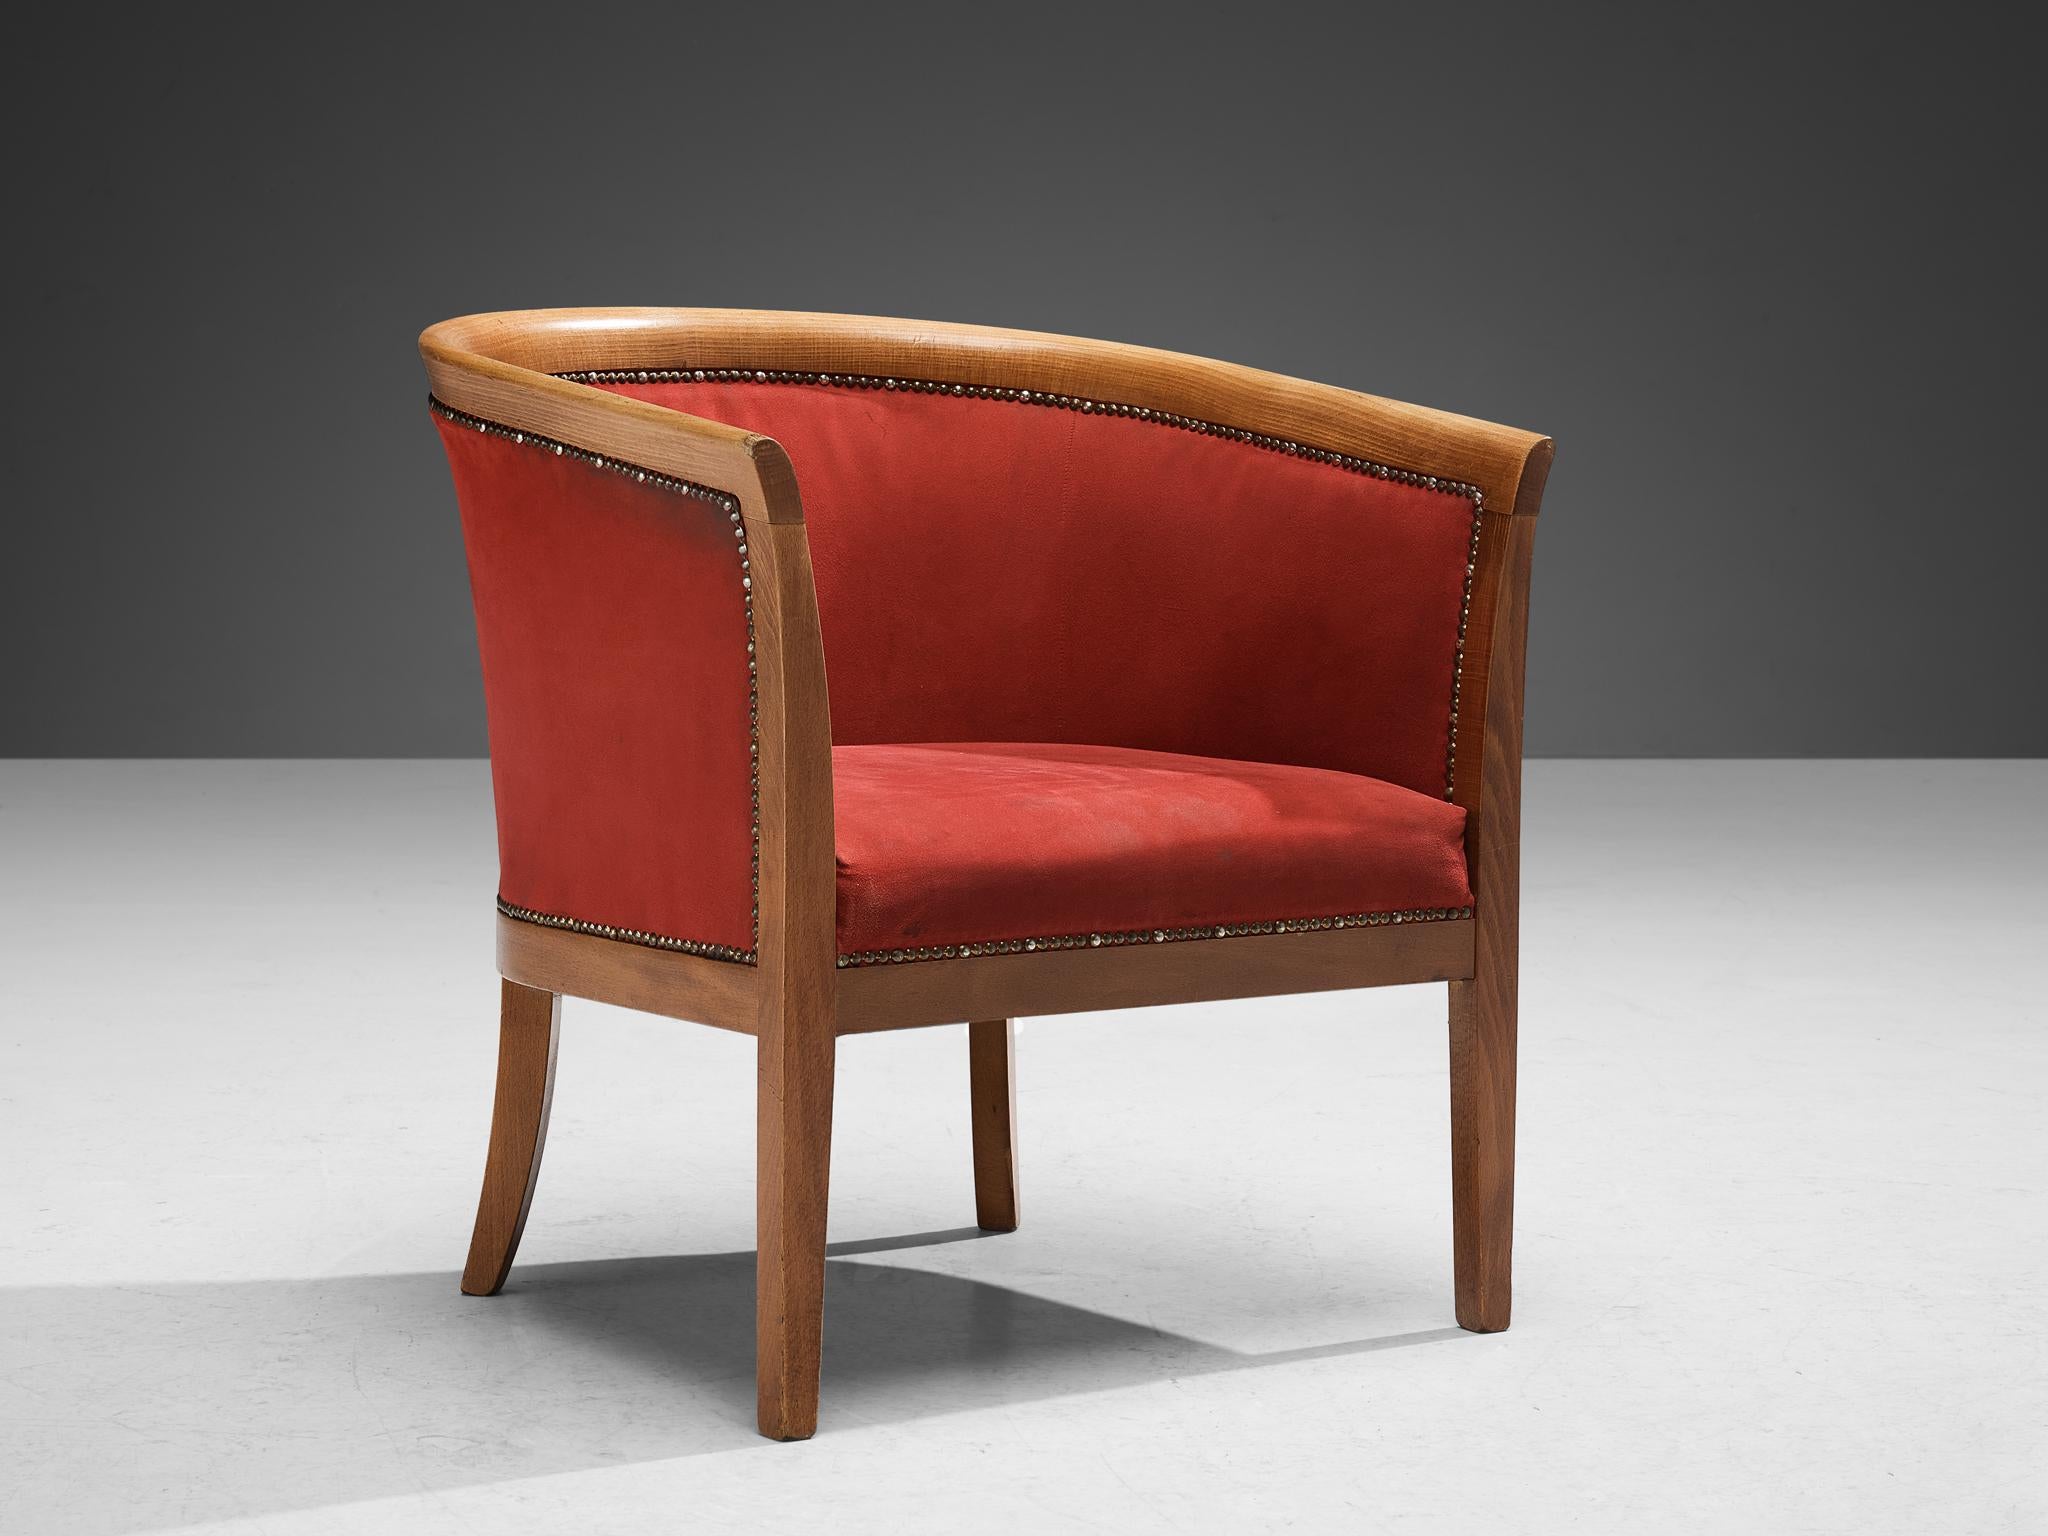 Club chair, leatherette, beech, brass, France, 1940s.

This classically sculpted armchair features a seating that is designed as a shell, which embraces the sitter wonderfully. The curvaceous lines of the frame are further emphasized by the brass